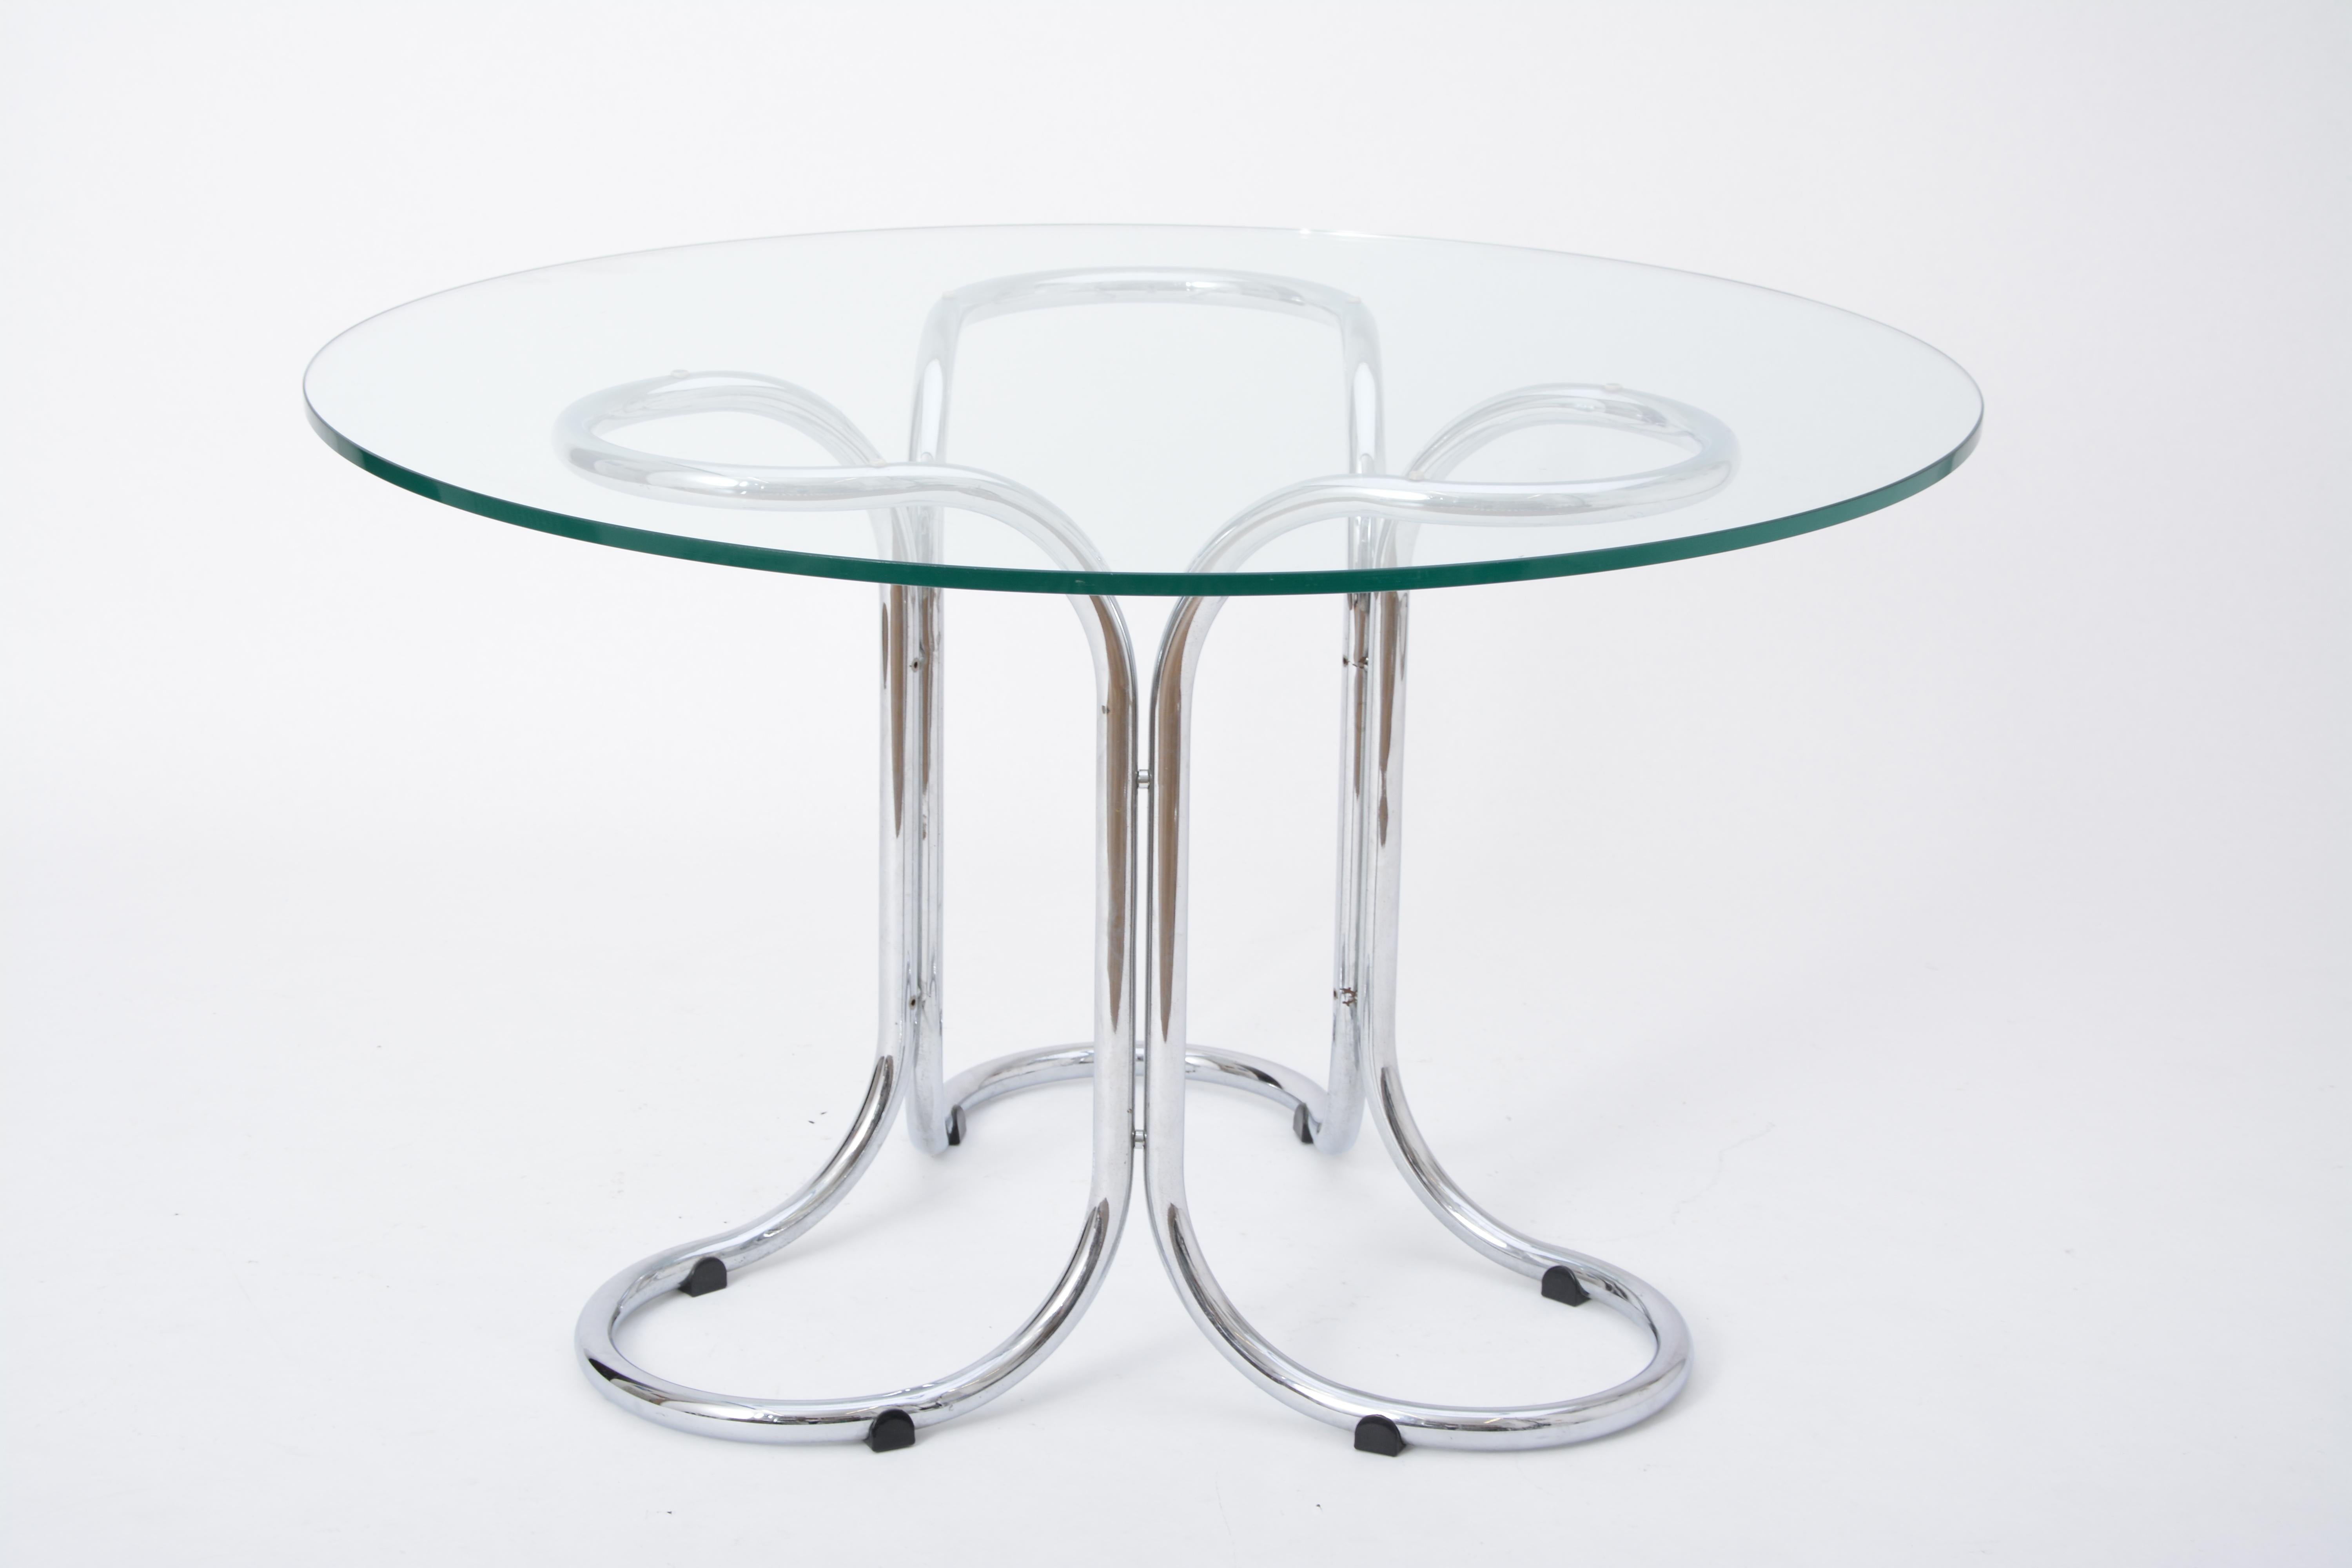 Italian Circular Mid-Century Modern Glass table in the style of Giotto Stoppino